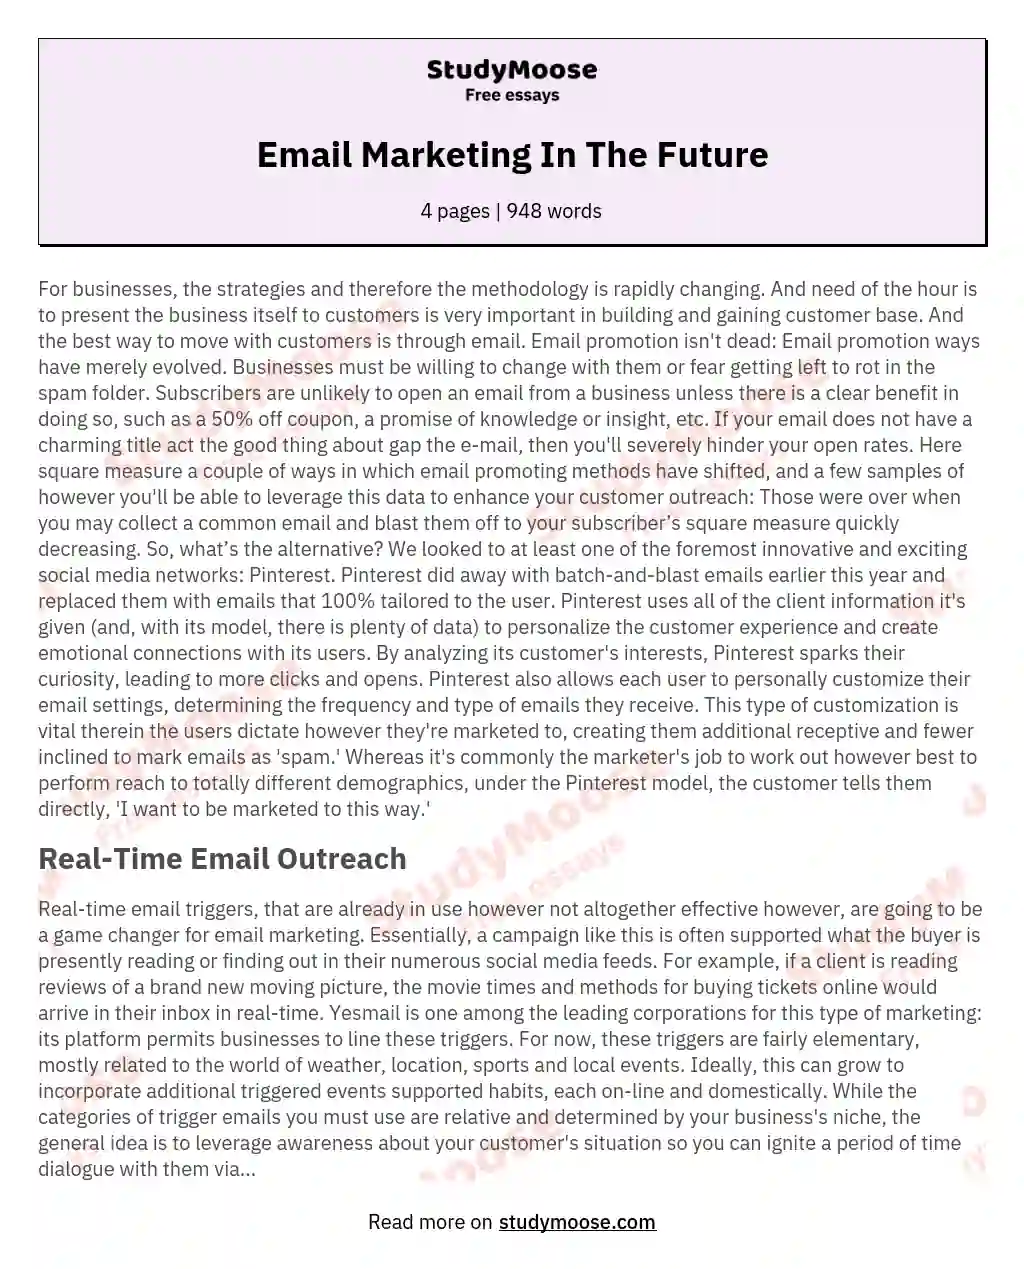 Email Marketing In The Future essay